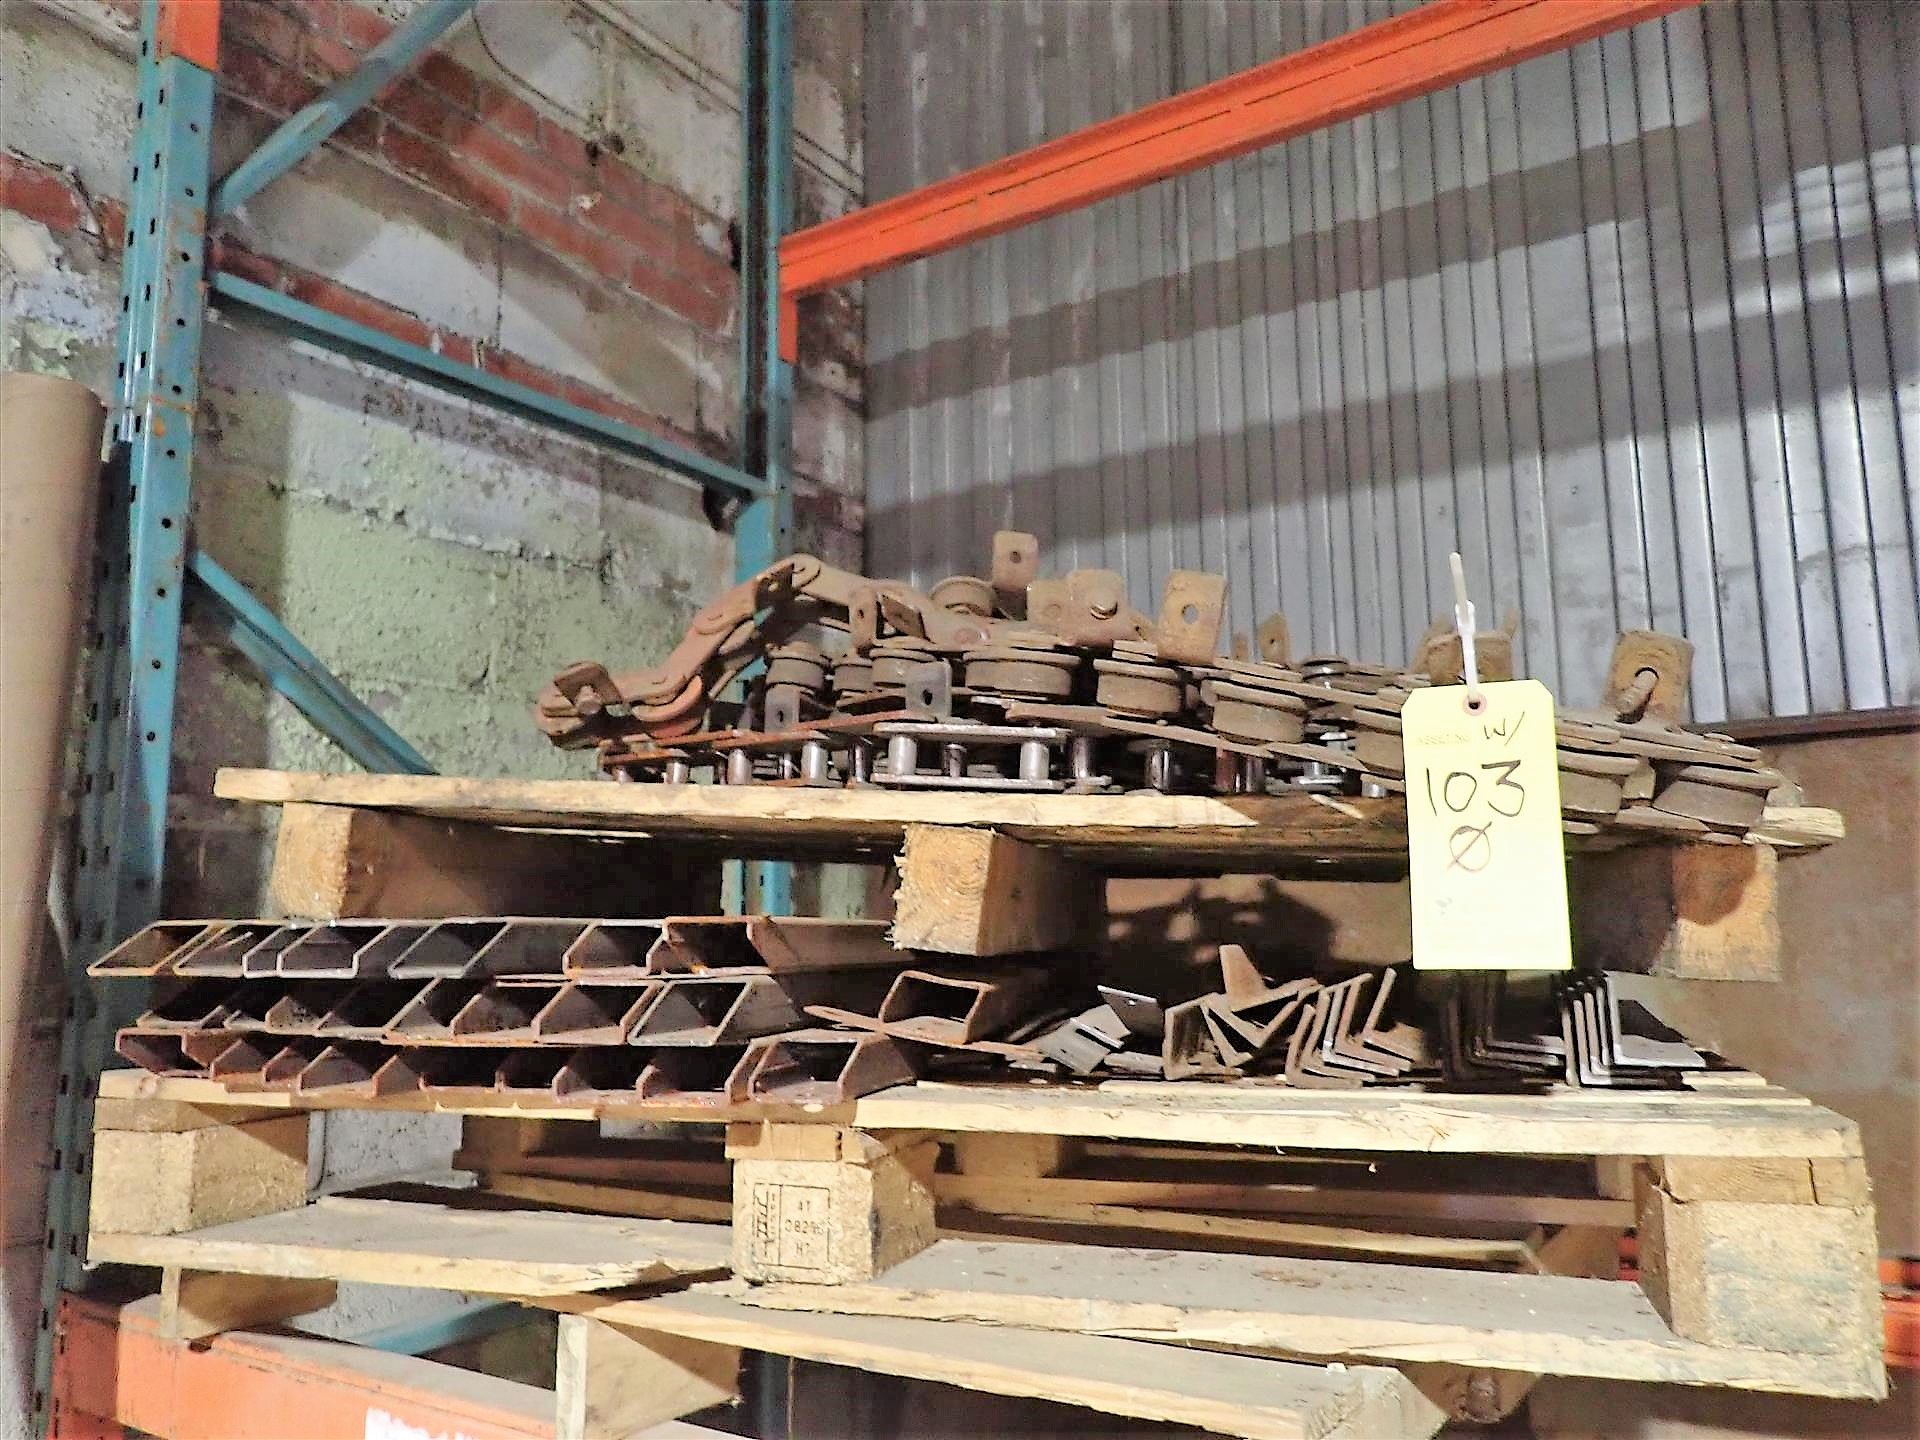 Chain Shredding Line 1/2 spare parts: chain shredder infeed belt, approx. 40" fluted rubber belt - Image 4 of 4